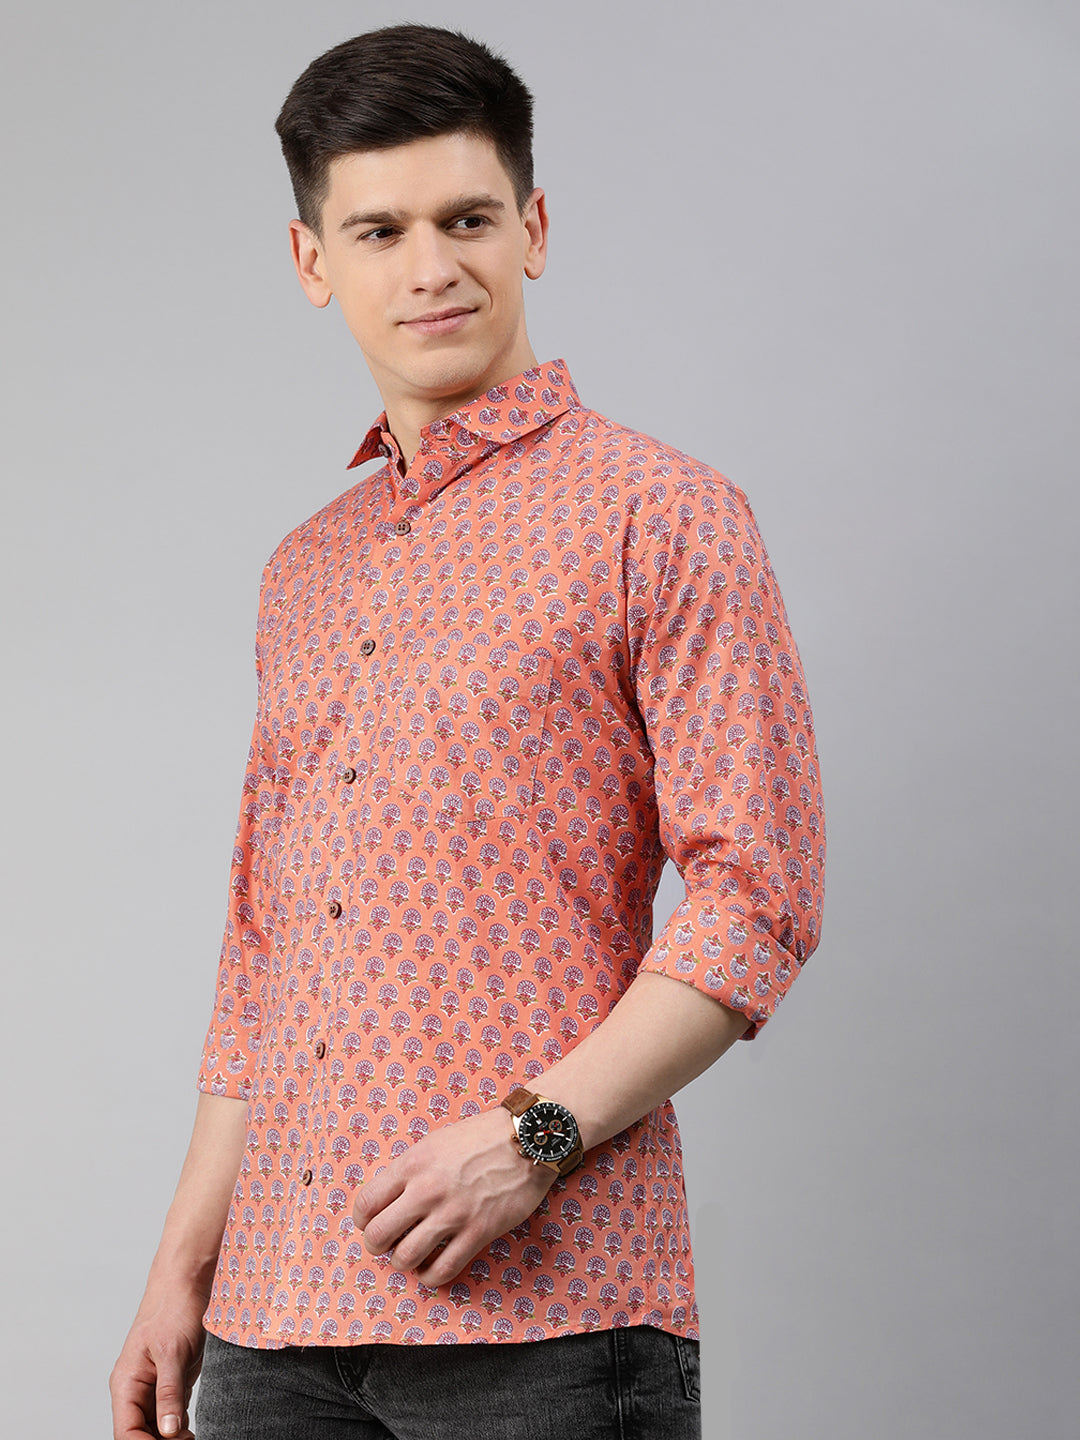 Peach Cotton Full Sleeves Shirts For Men